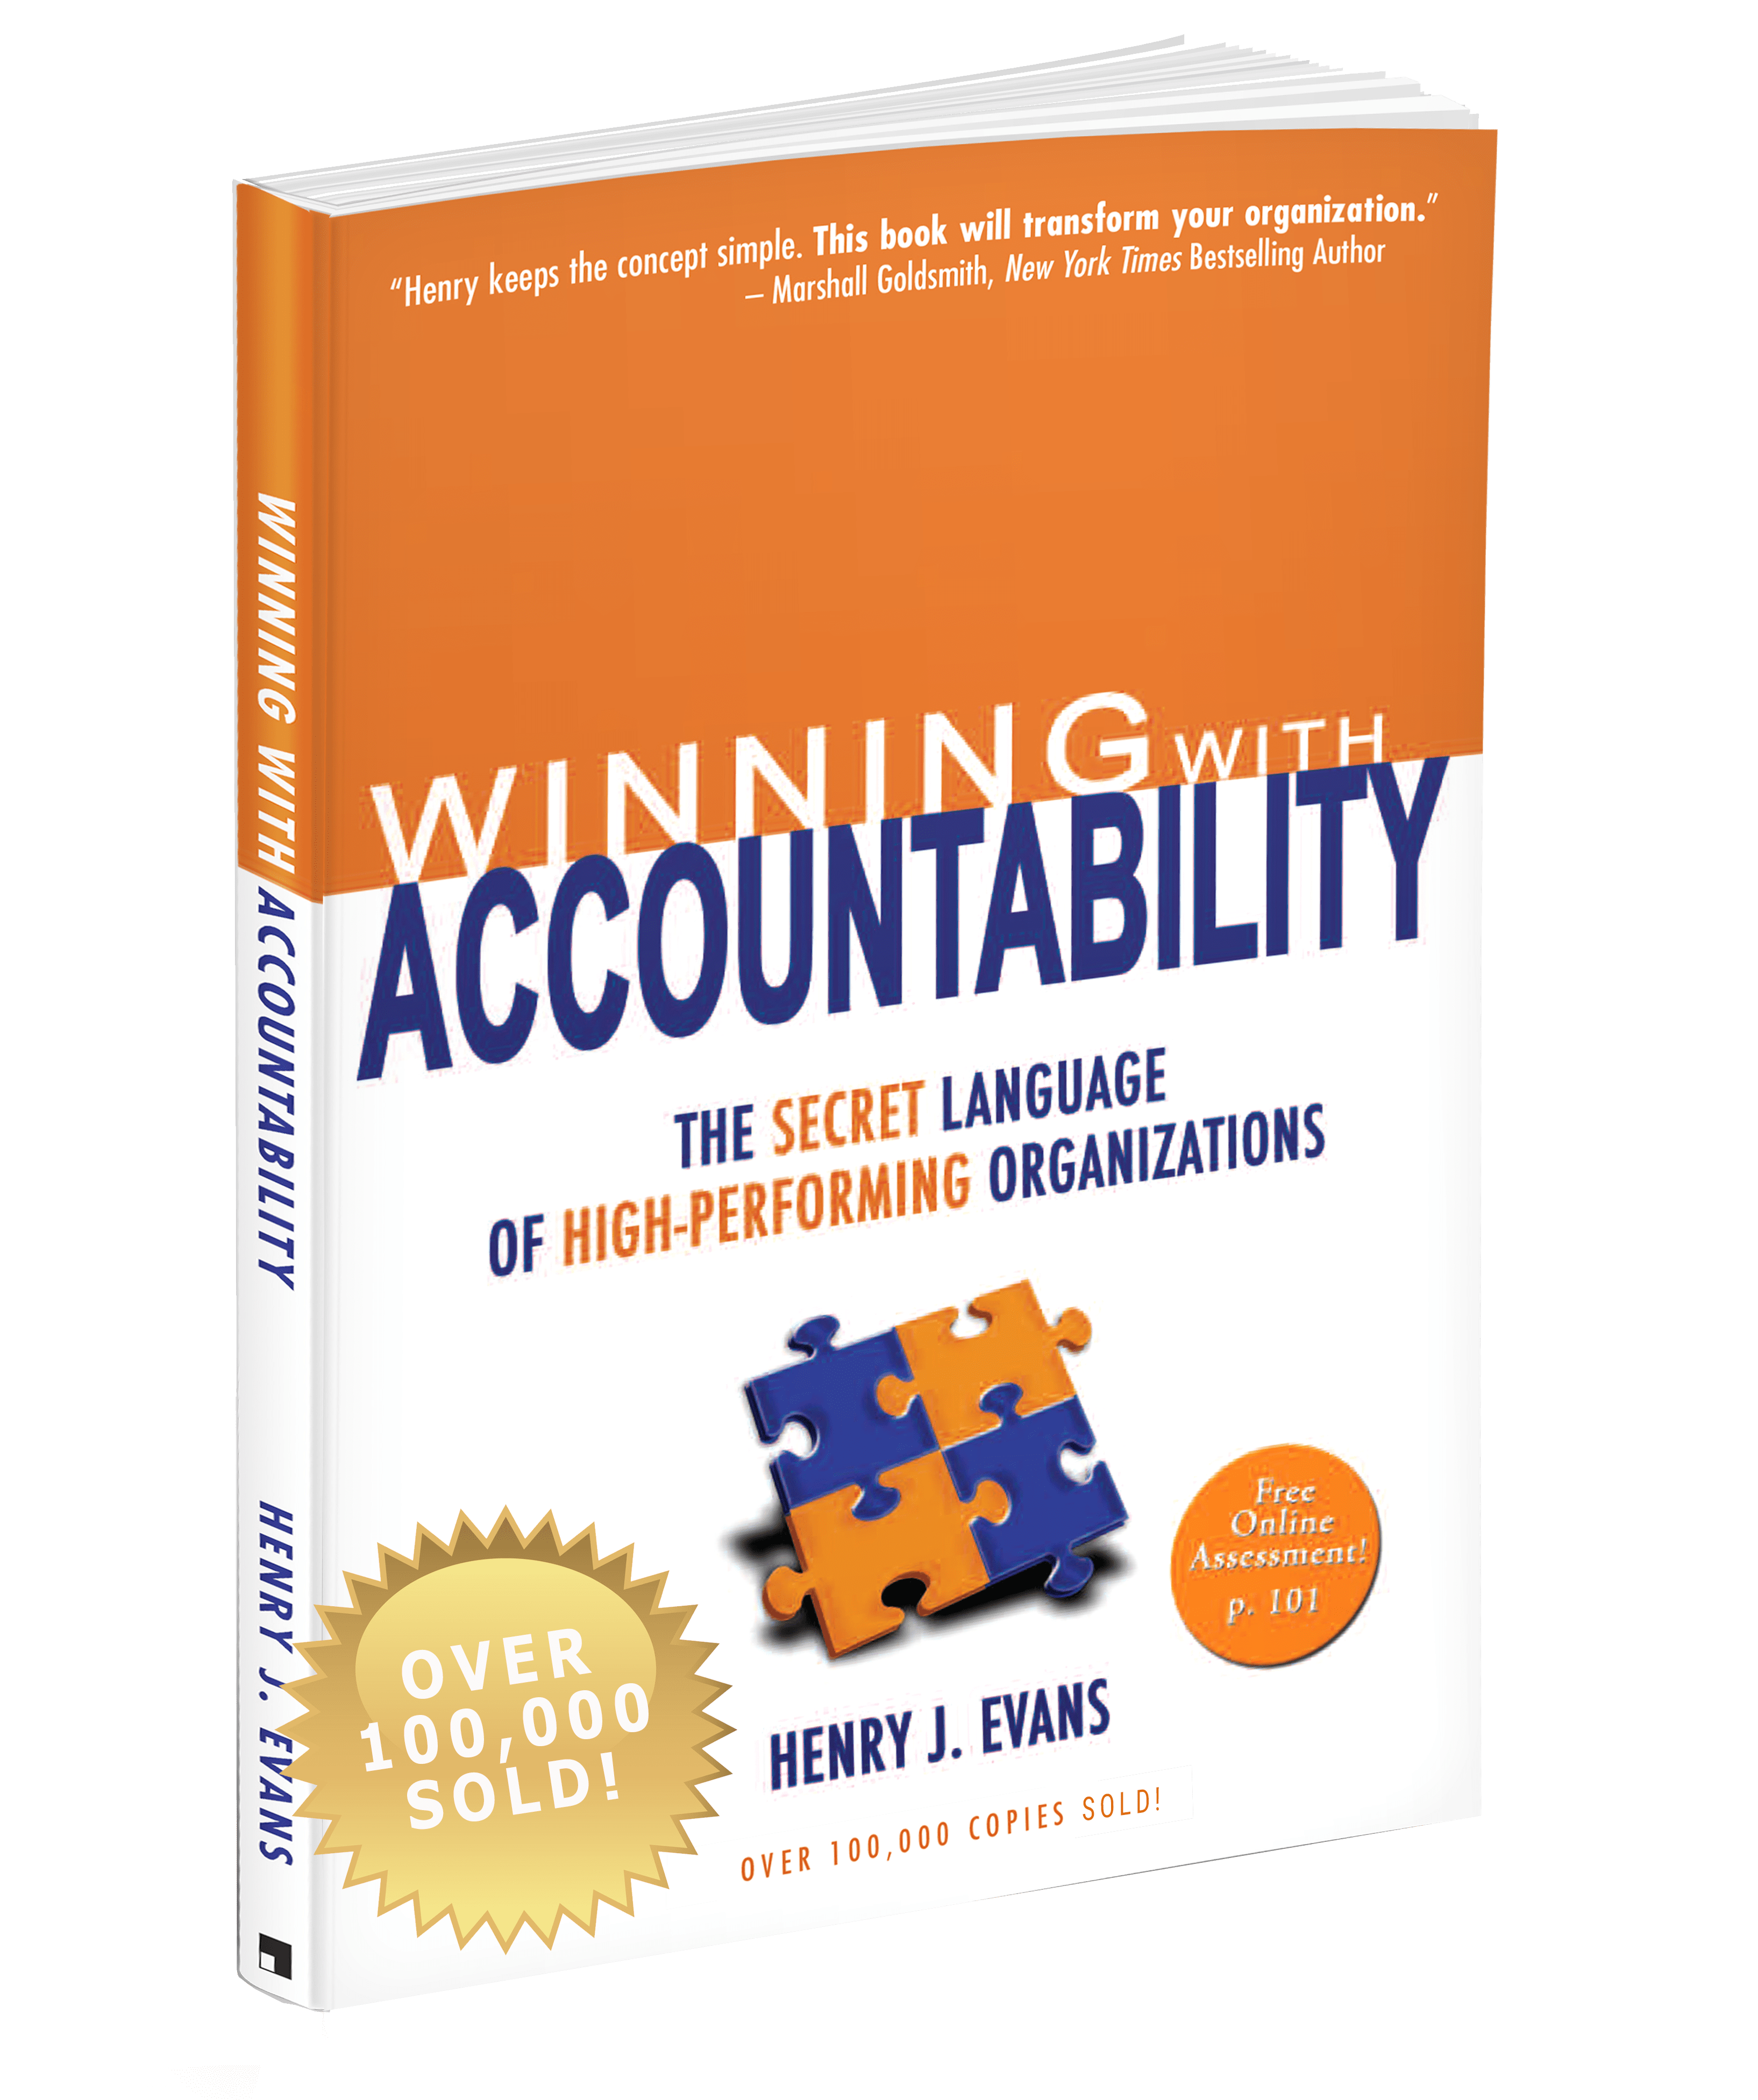 Cover of the best-selling book, Winning With Accountability™, alongside a brief summary highlighting its focus on teaching the language of accountability, making commitments, and enhancing performance and relationships for a competitive edge, with a note on its success of over 100,000 copies sold.